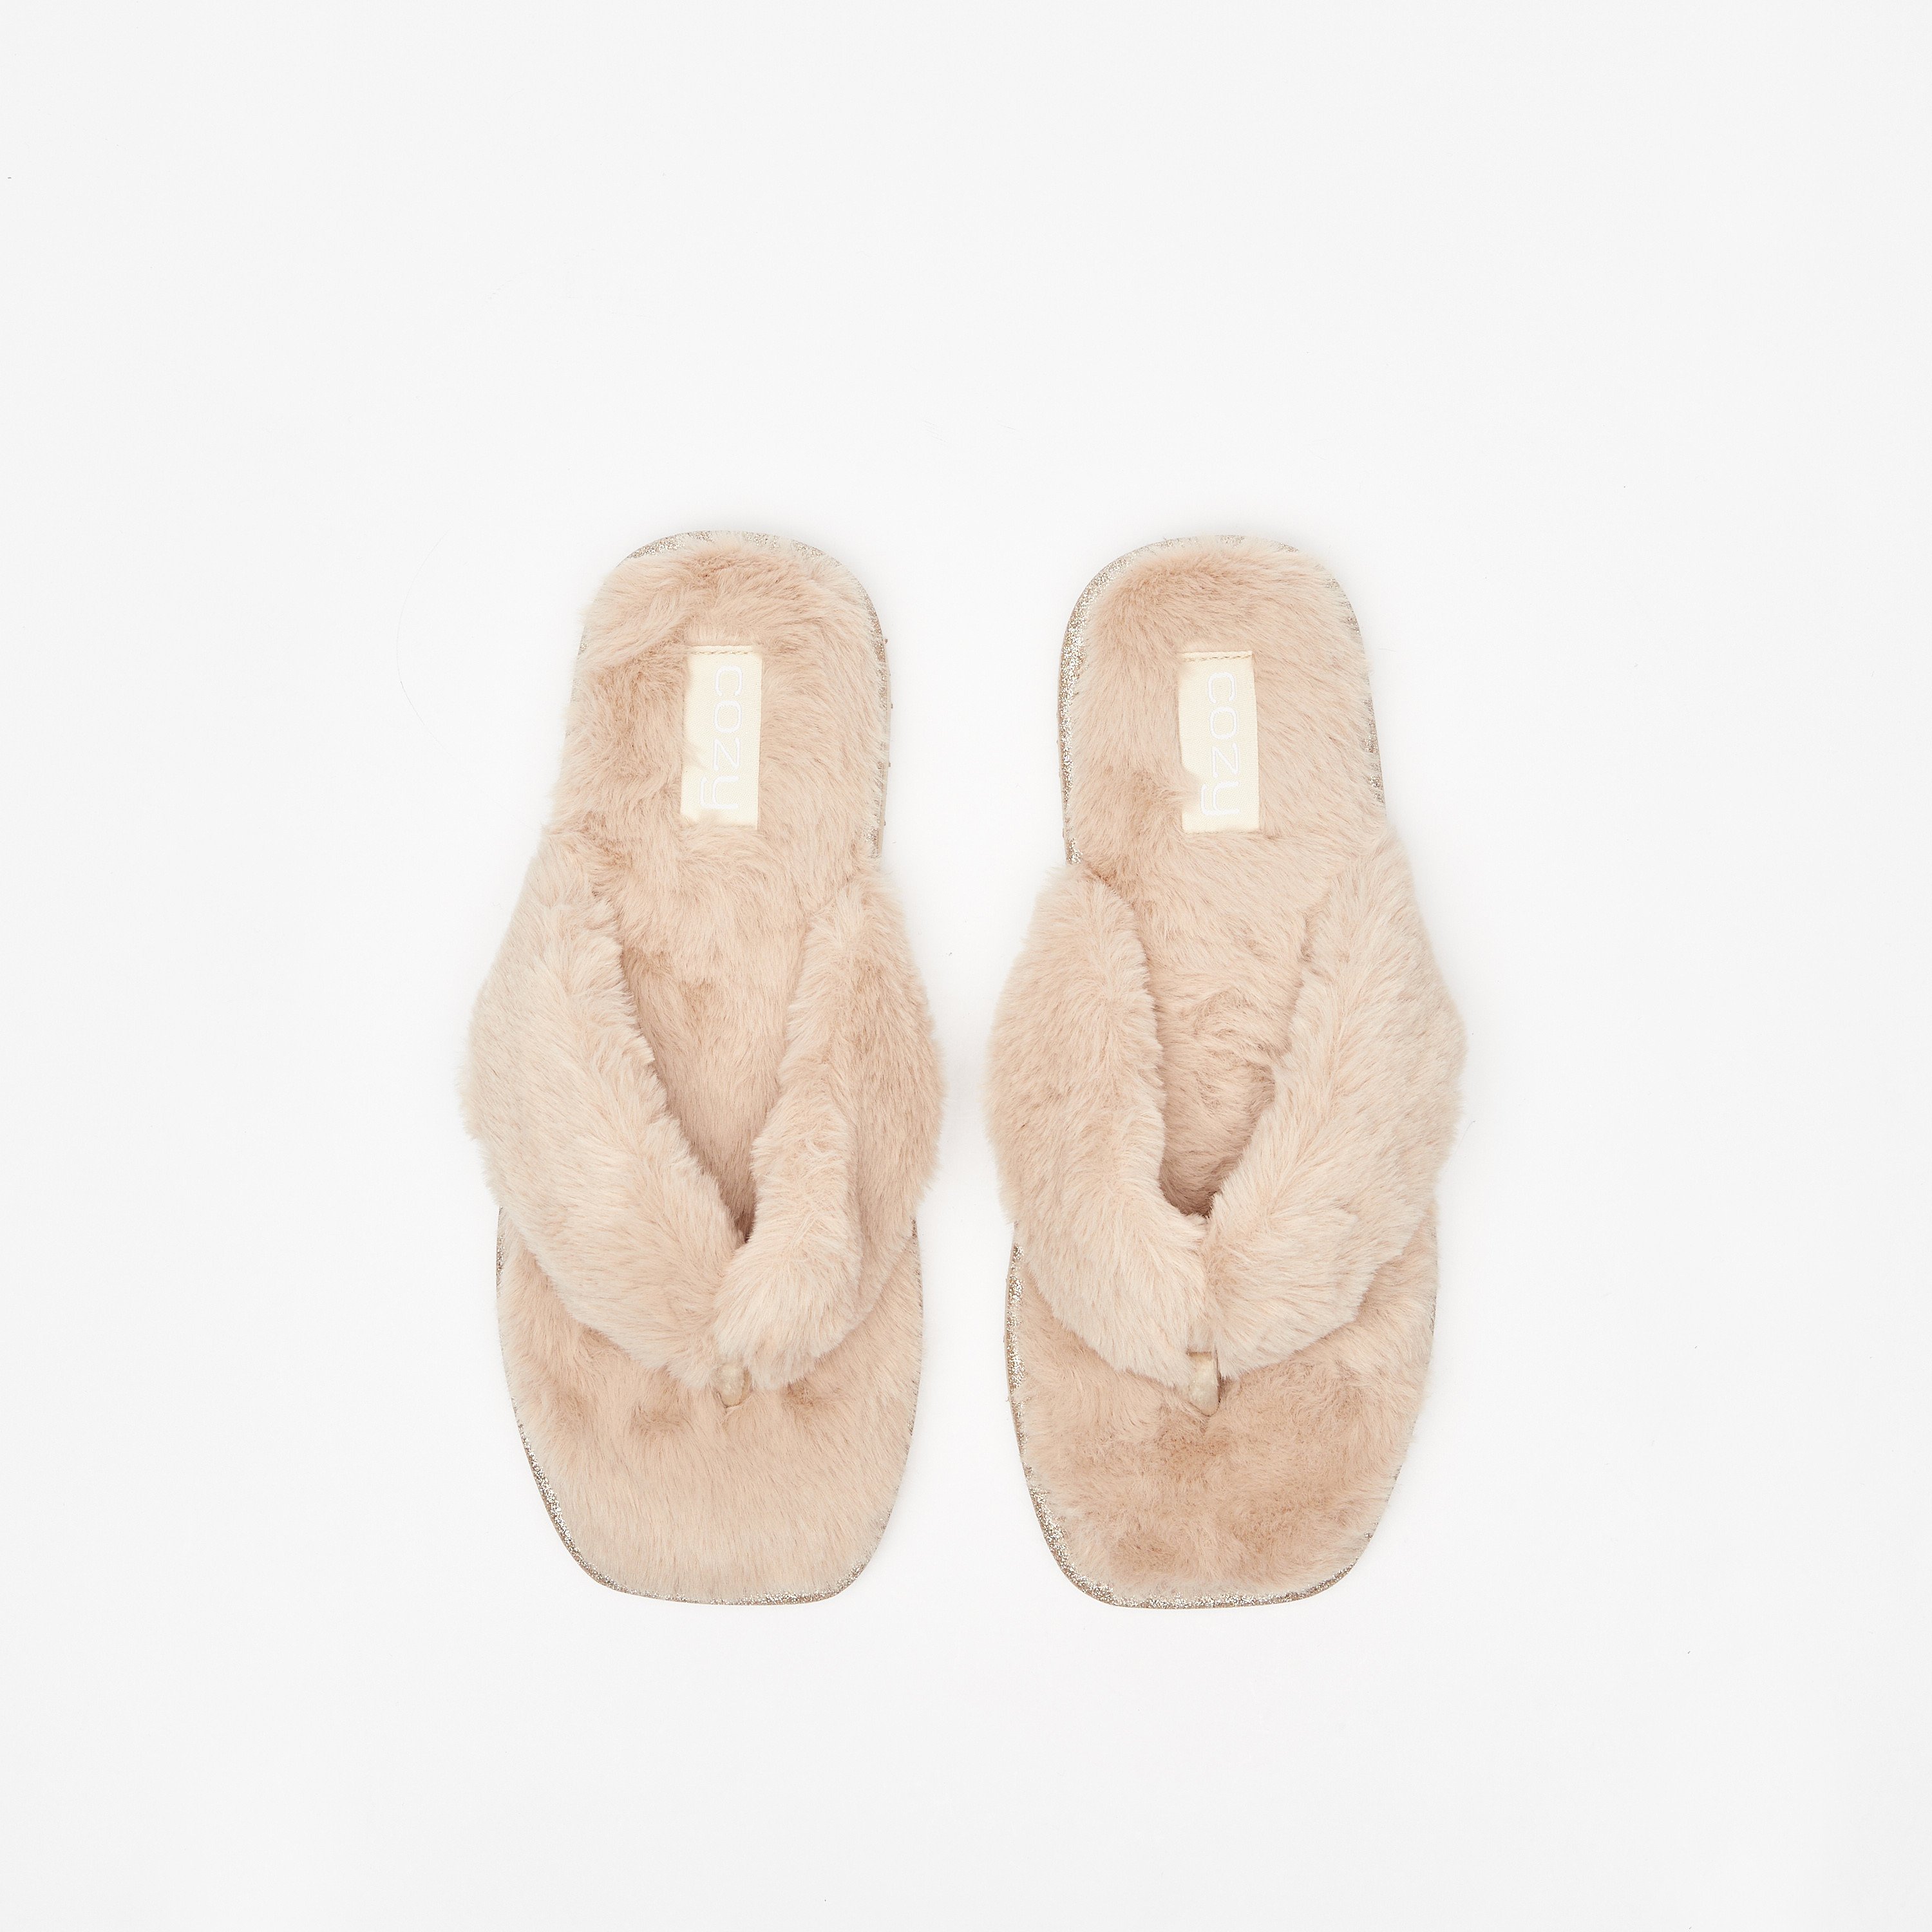 6 New House Slippers That Would Make Great Gifts | The Strategist